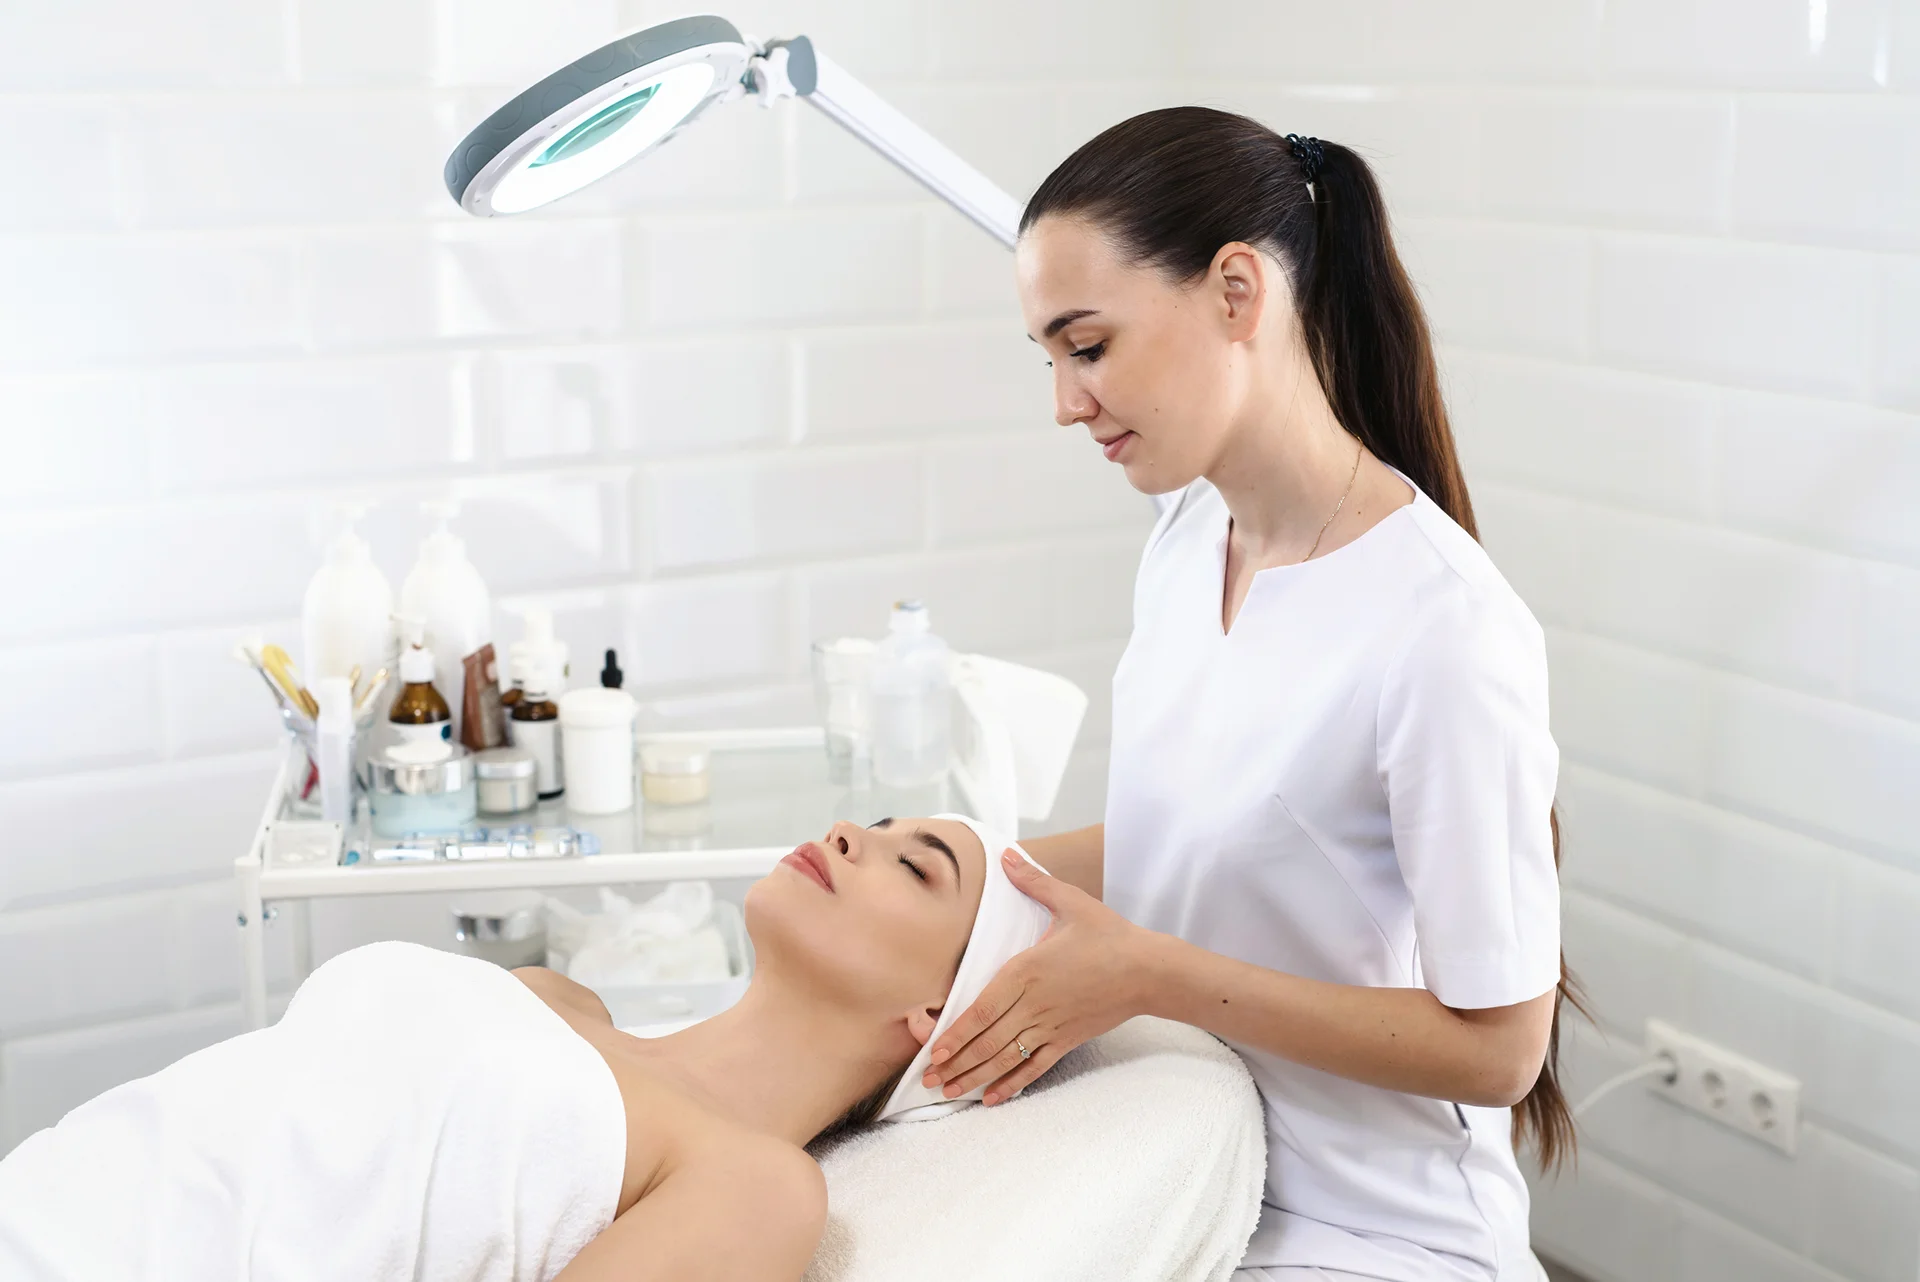 esthetician performs facial treatment on her client